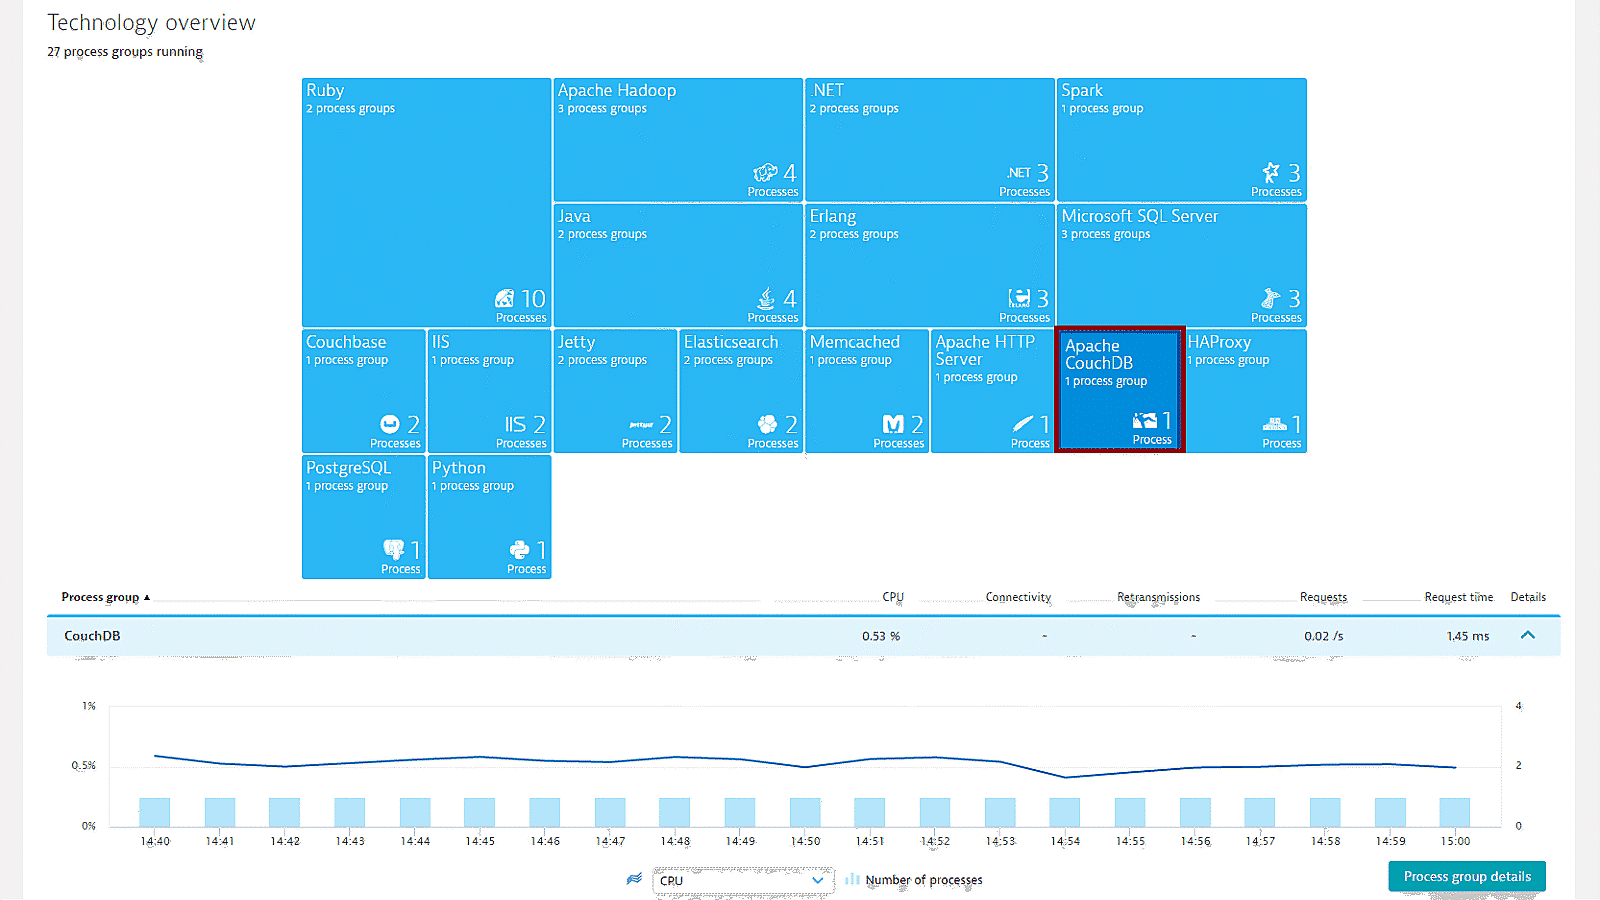 CouchDB monitoring in technology overview in Dynatrace screenshot